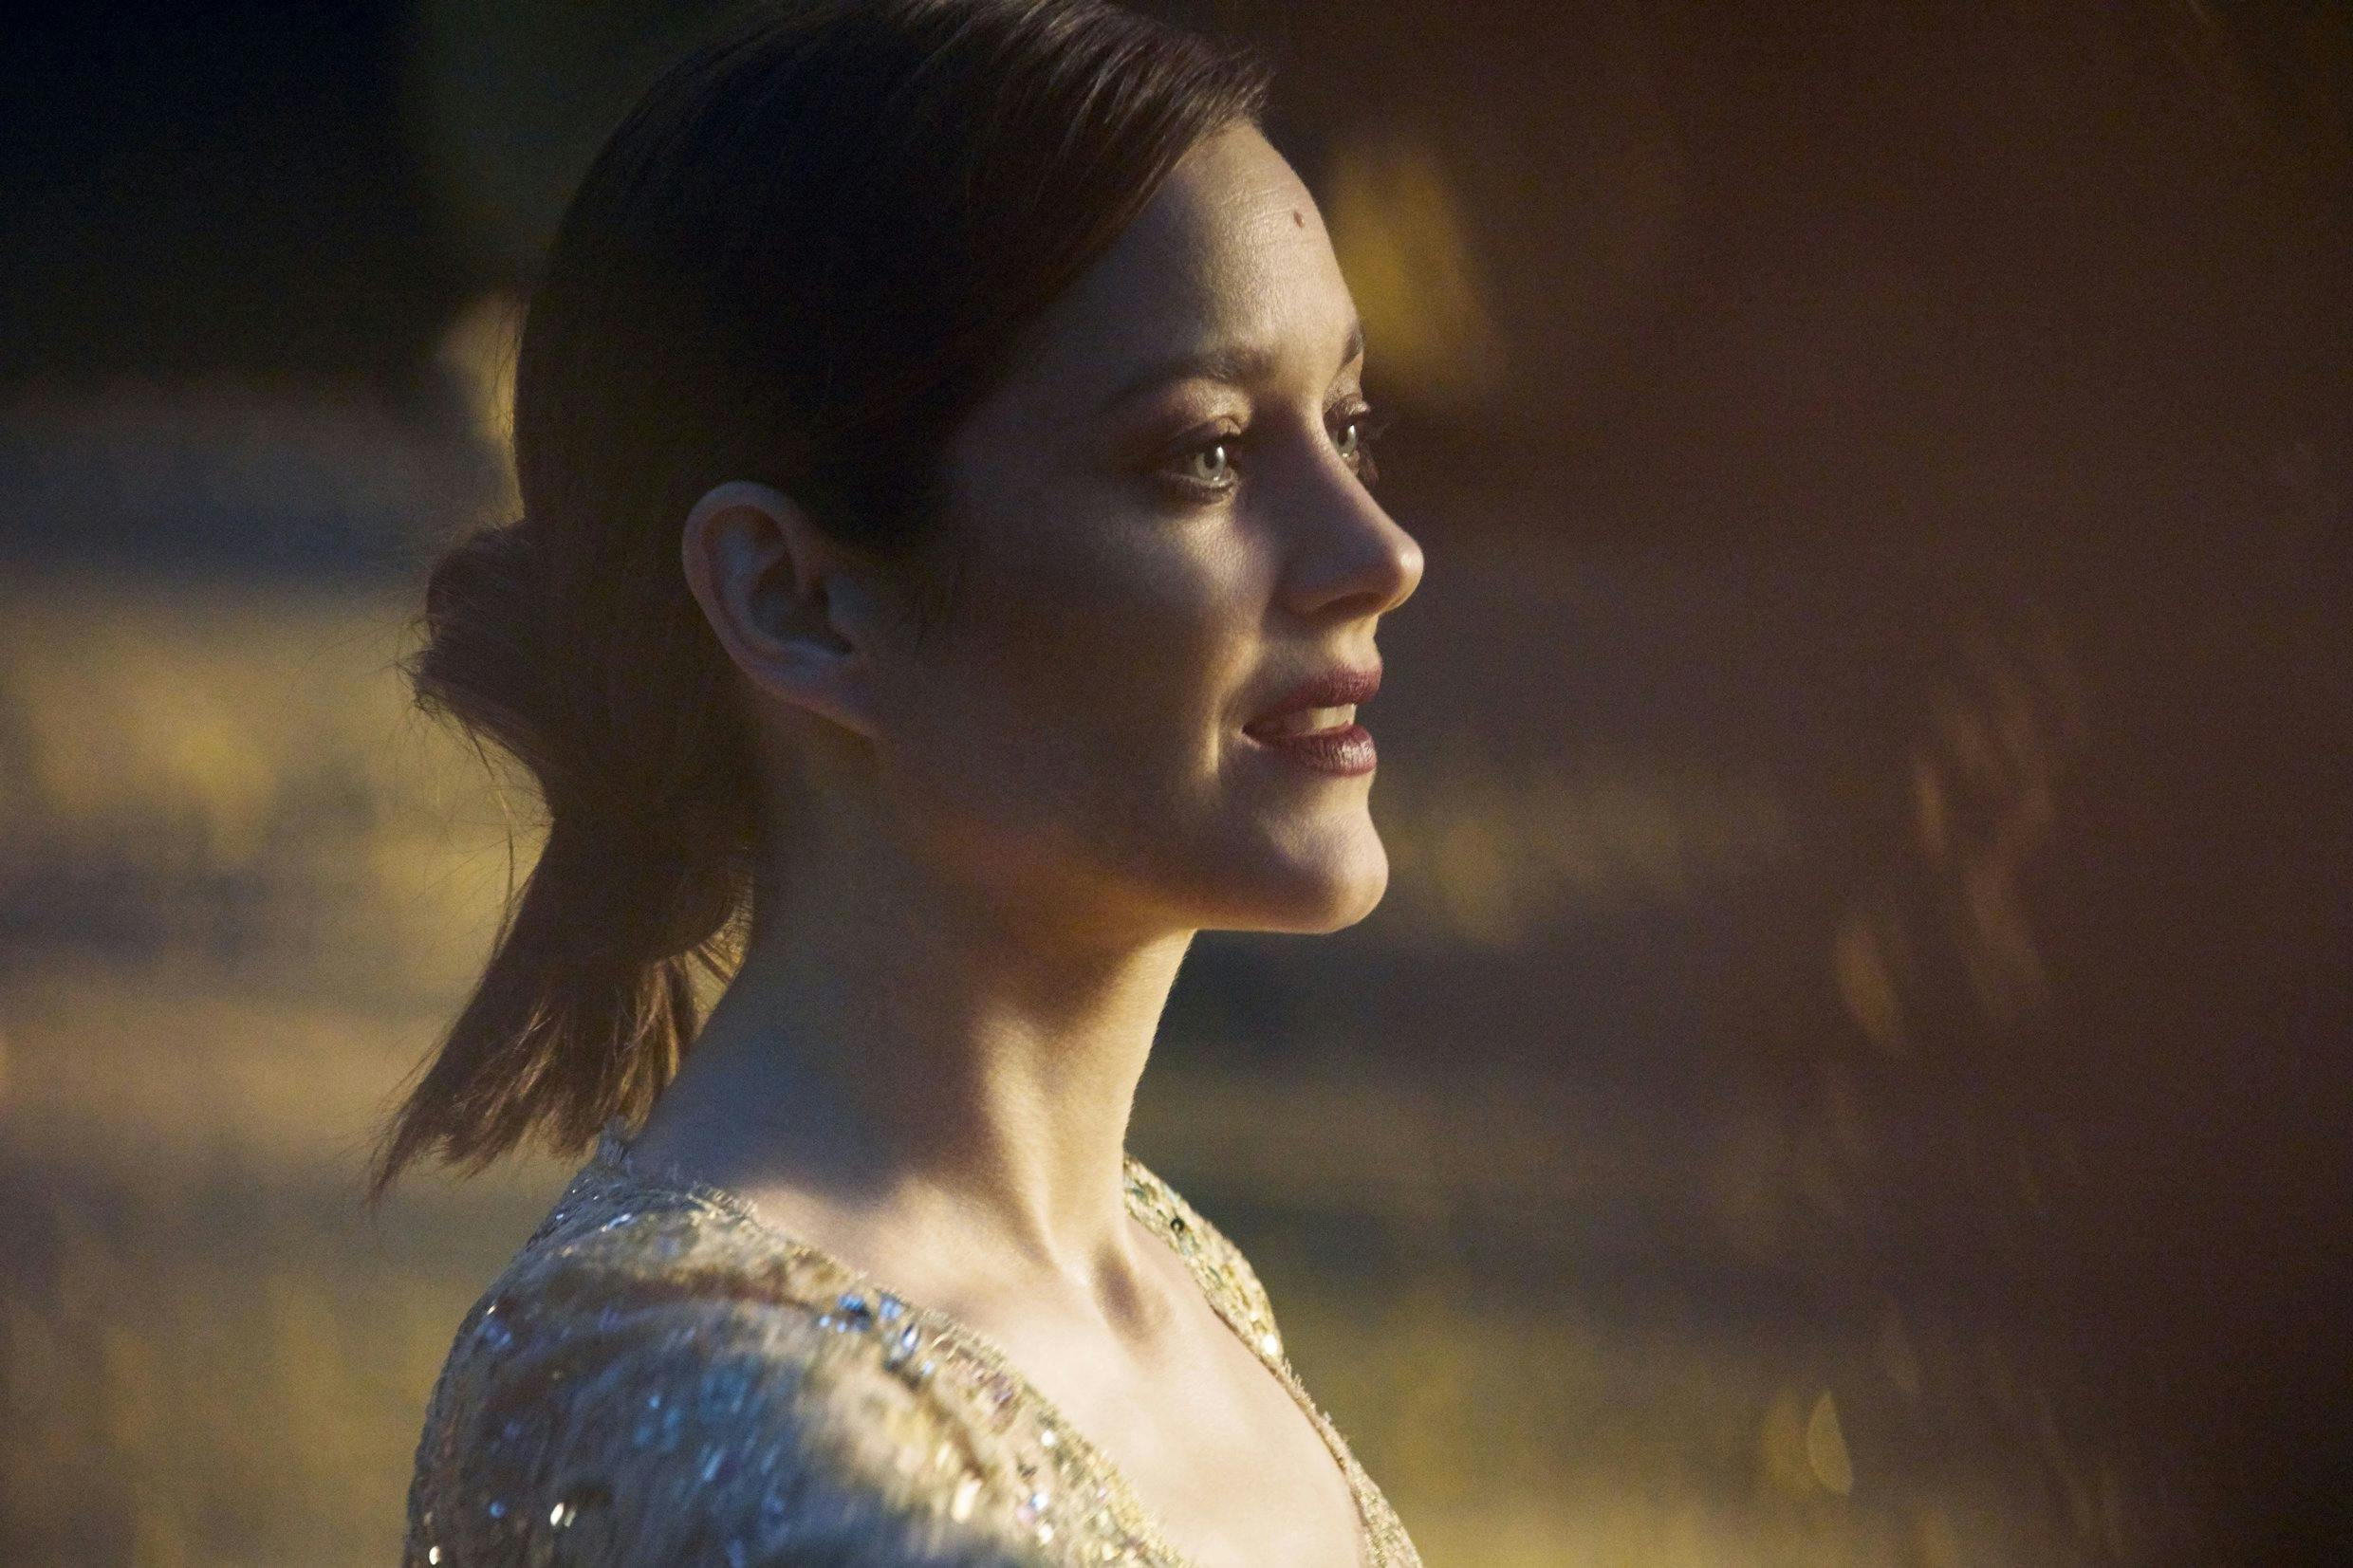 Marion Cotillard Dances On The Moon In New CHANEL No5 Ad